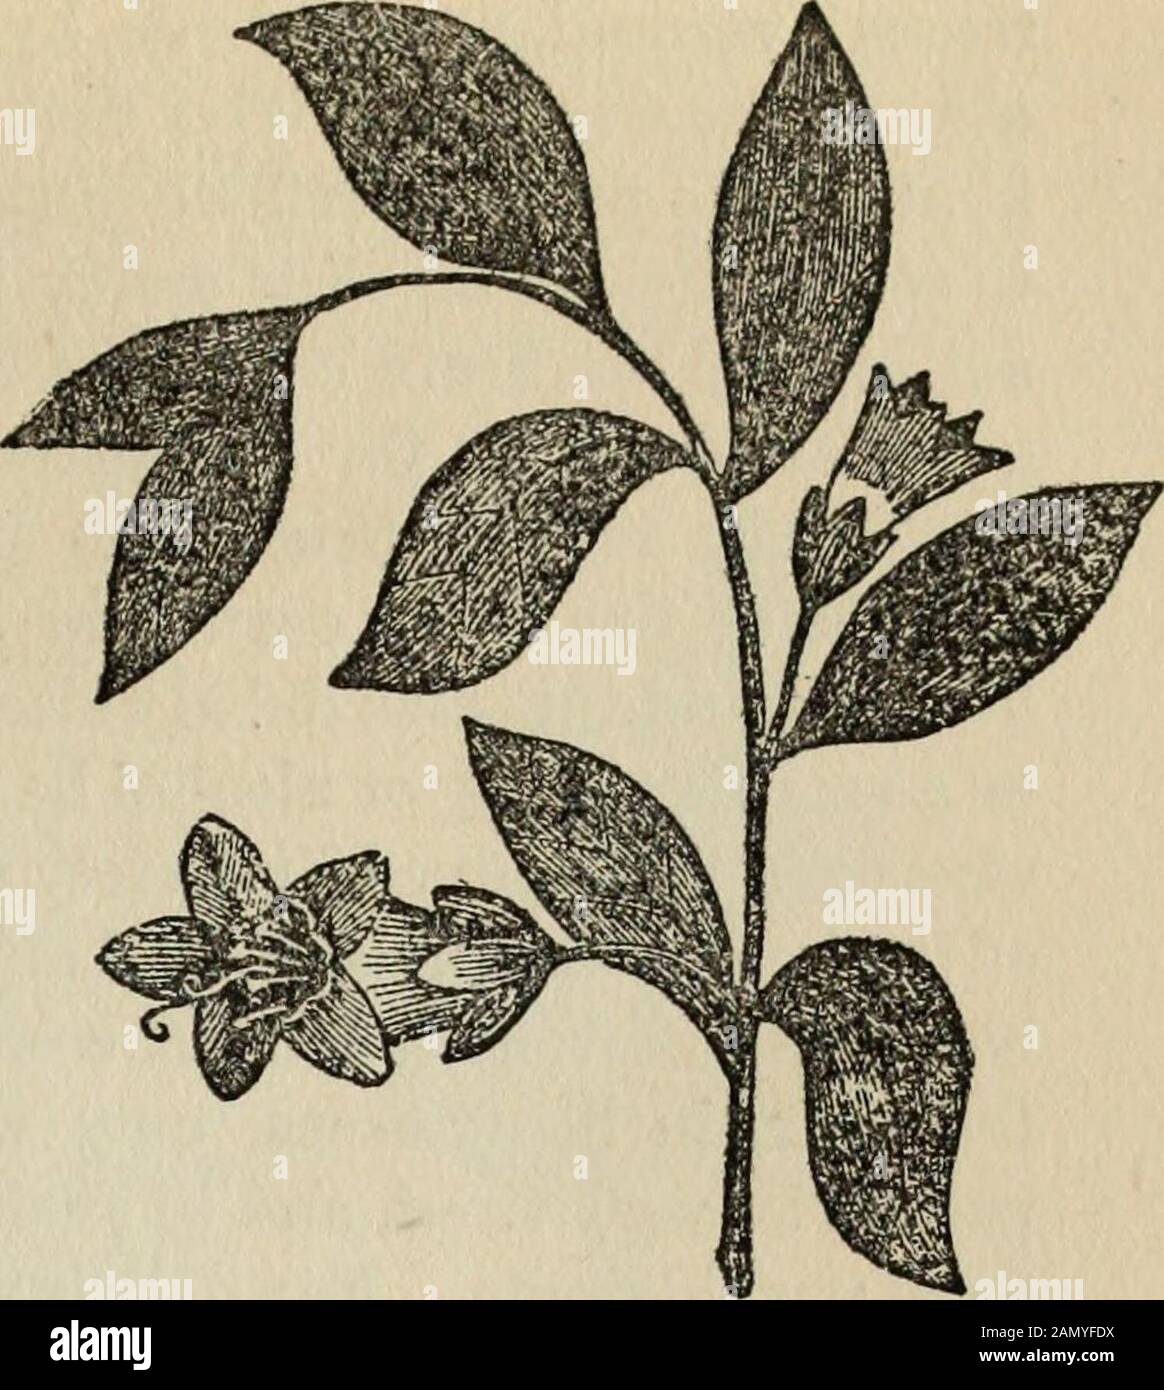 Health knowledge : a thorough and concise knowledge of the prevention, causes, and treatments of disease, simplified for home use . Black Hellebore HEMLOCK—PERUVIAN BARK —NIGHTSHADE —GLYCERINE 1175. Grarden Nightshade Garden Nightshade.—Anative plant of Europe, andnaturalized in this country,especially along roads. Itis used as a narcotic, andmay be taken internally orapplied externally. If usedin a strong solution, it willremove the upper layer ofthe skin. Glycerine is a clear, col-orless, thick liquid of sweettaste, obtained by decompo-sition and distillation offats. It dissolves manysubstan Stock Photo